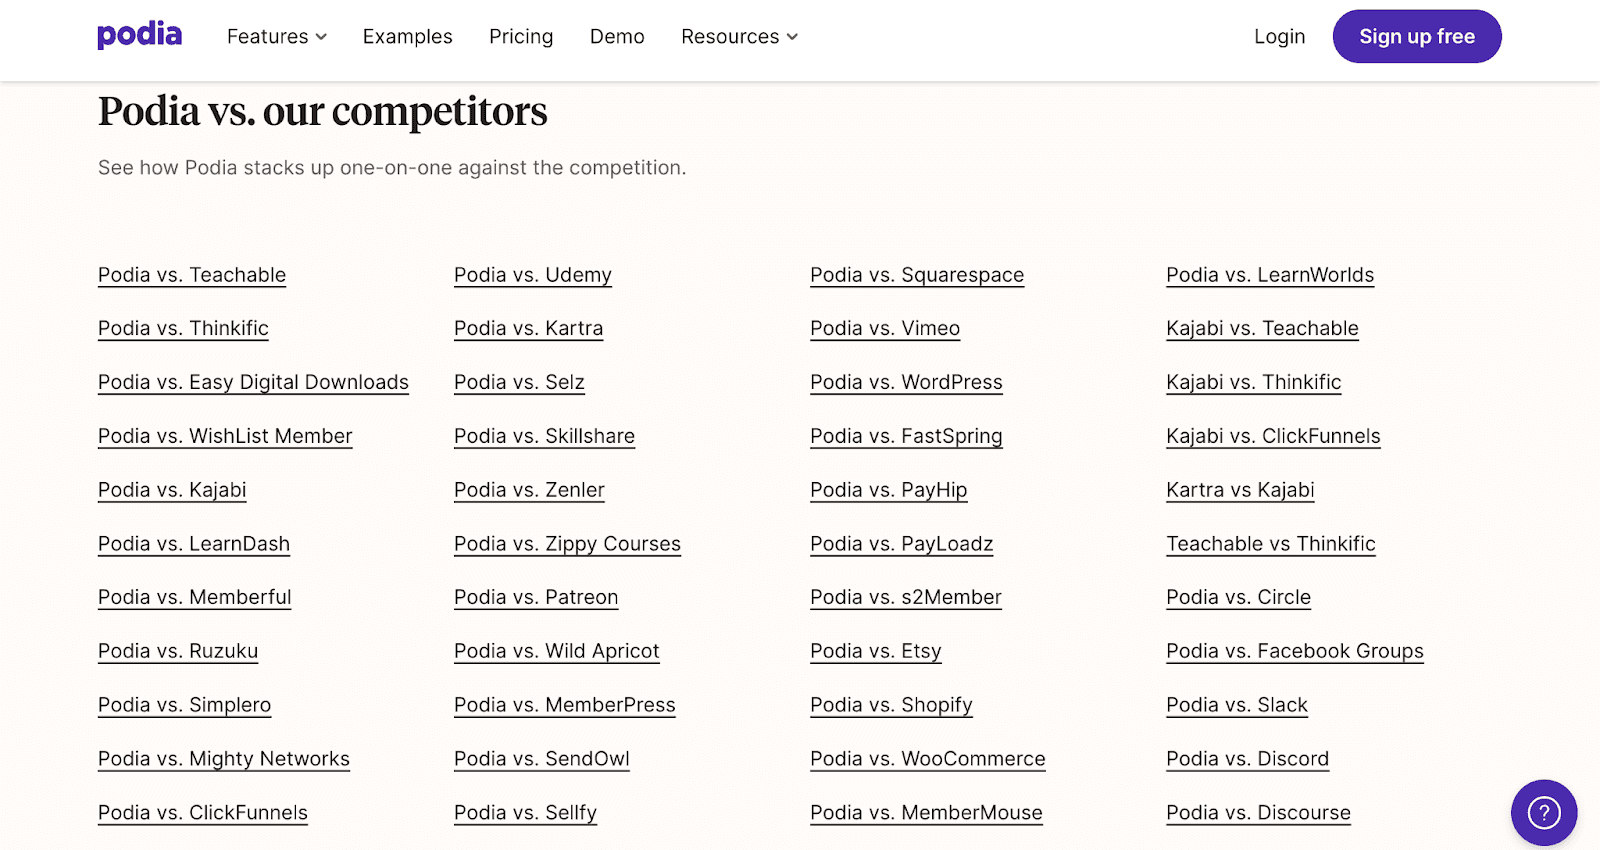 Podia vs their competitors page